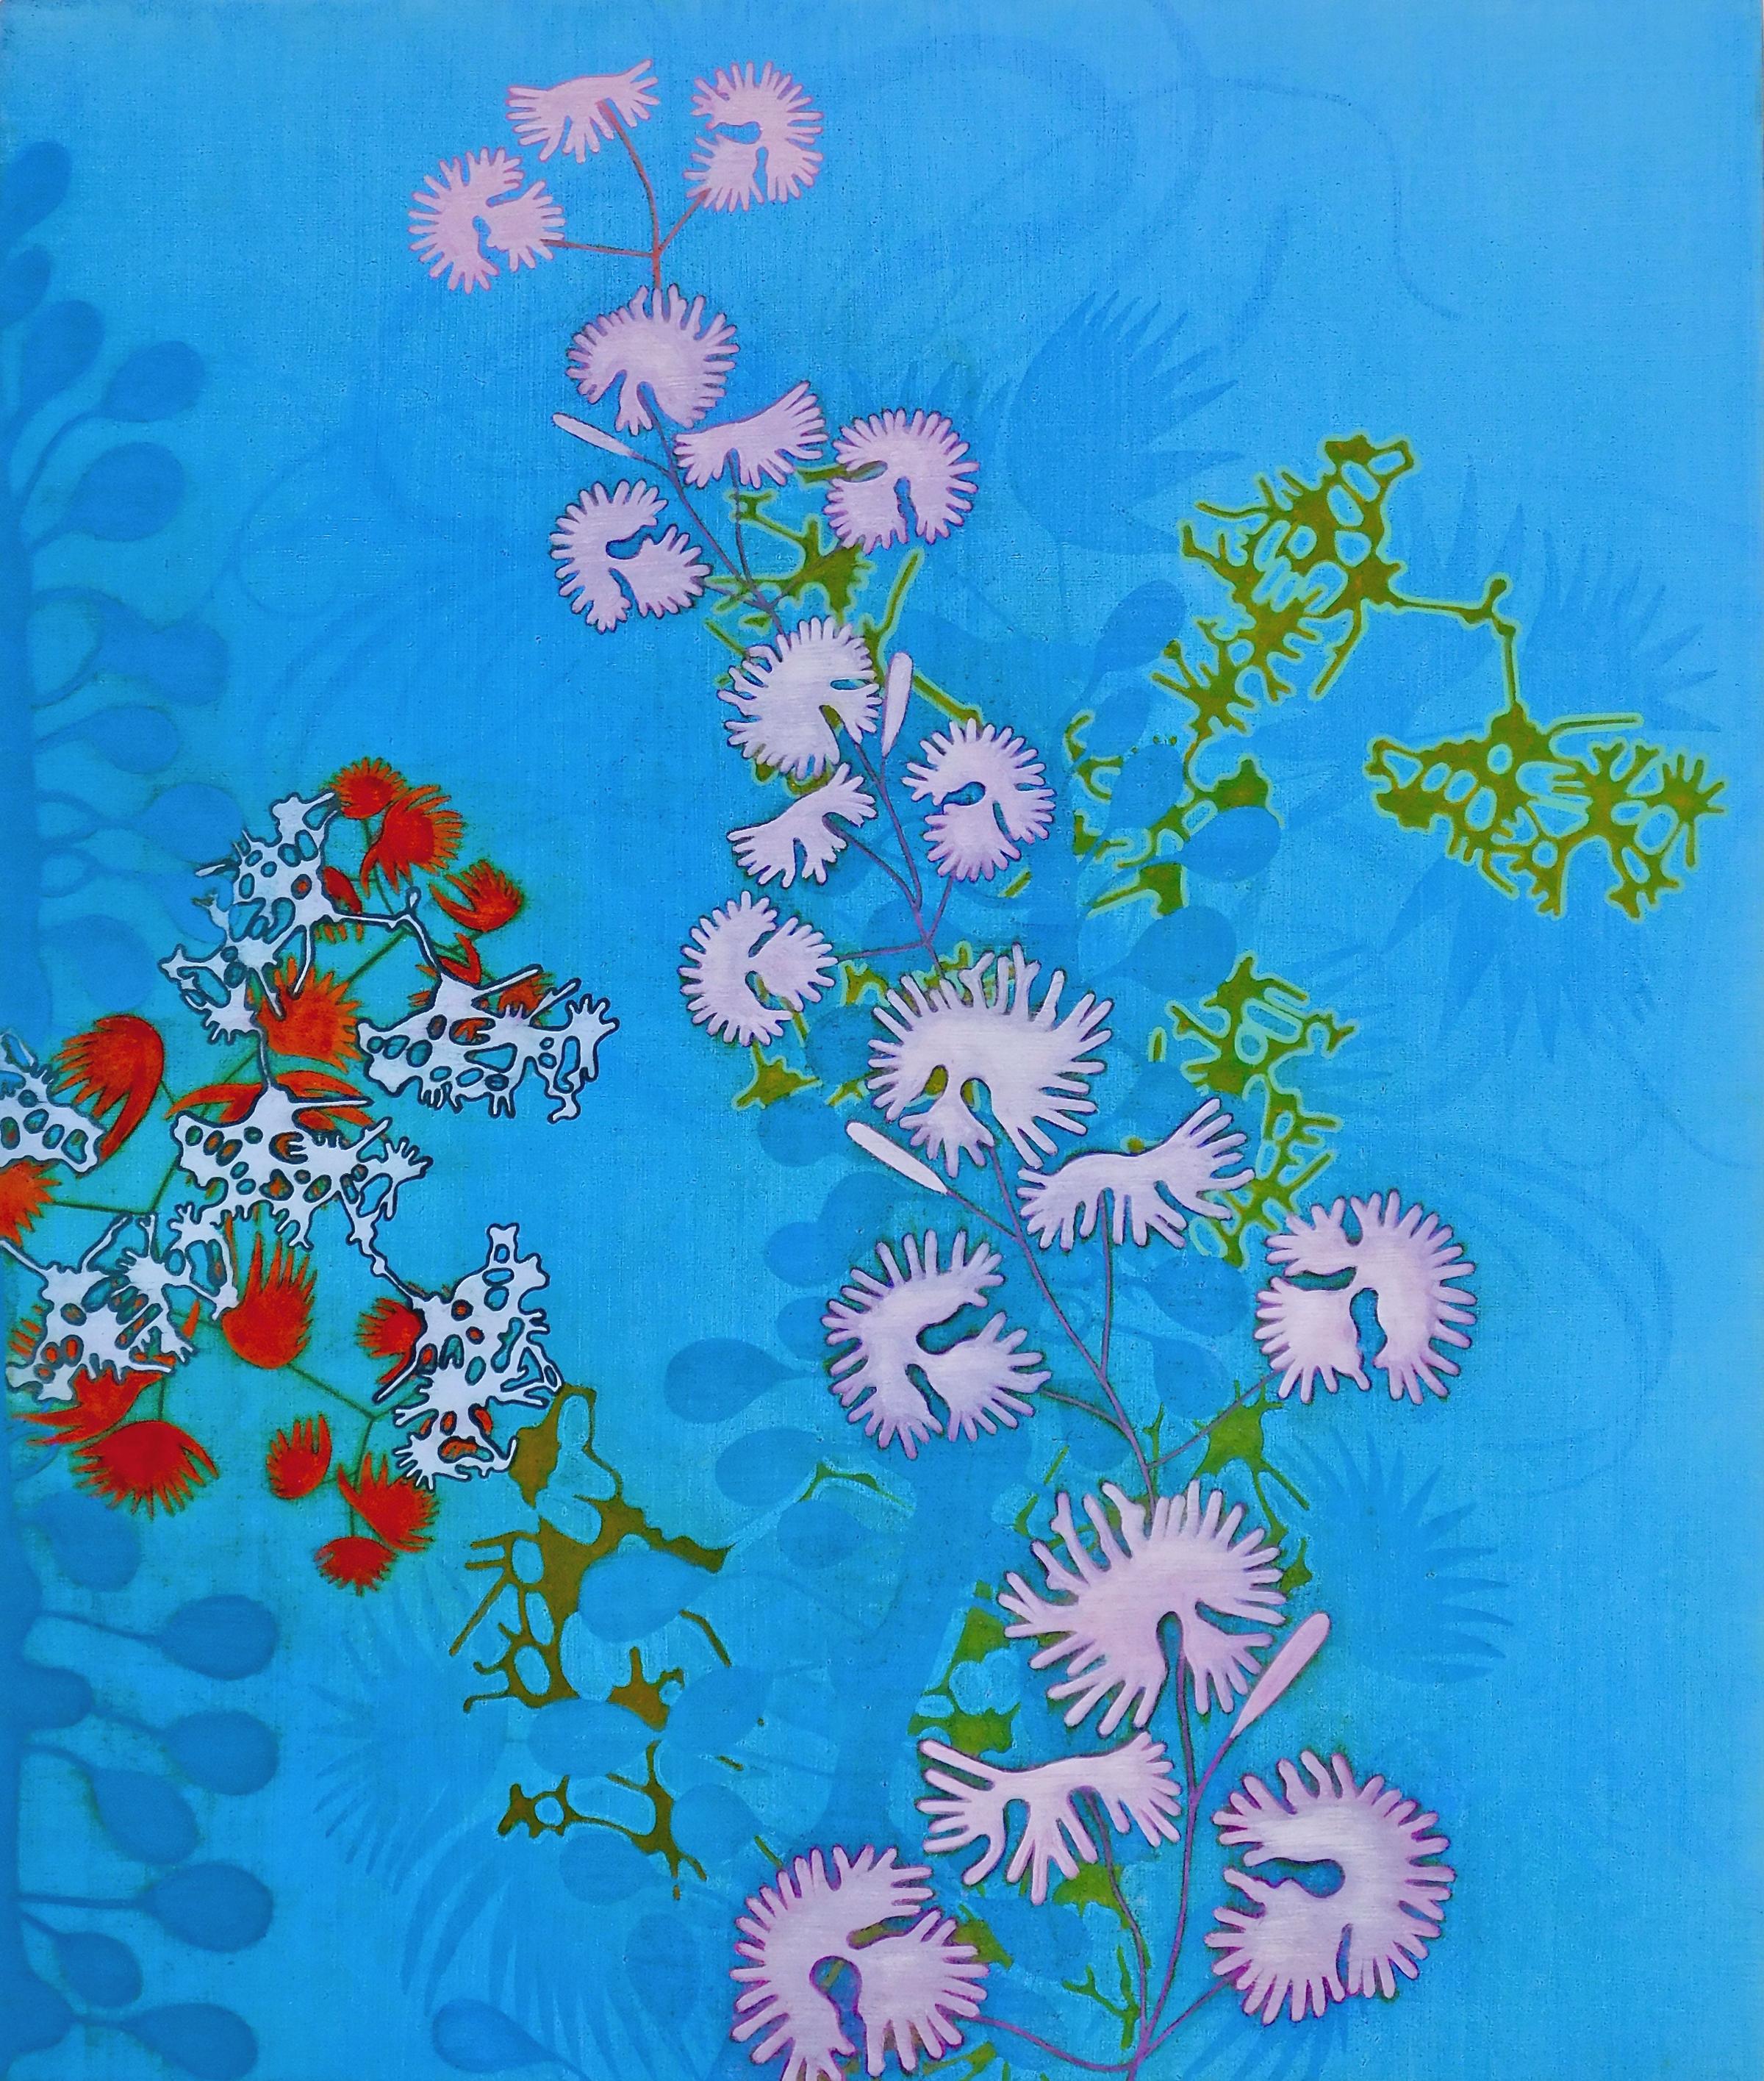 #21-13 - Abstract Floral Painting / Blue Nature Painting